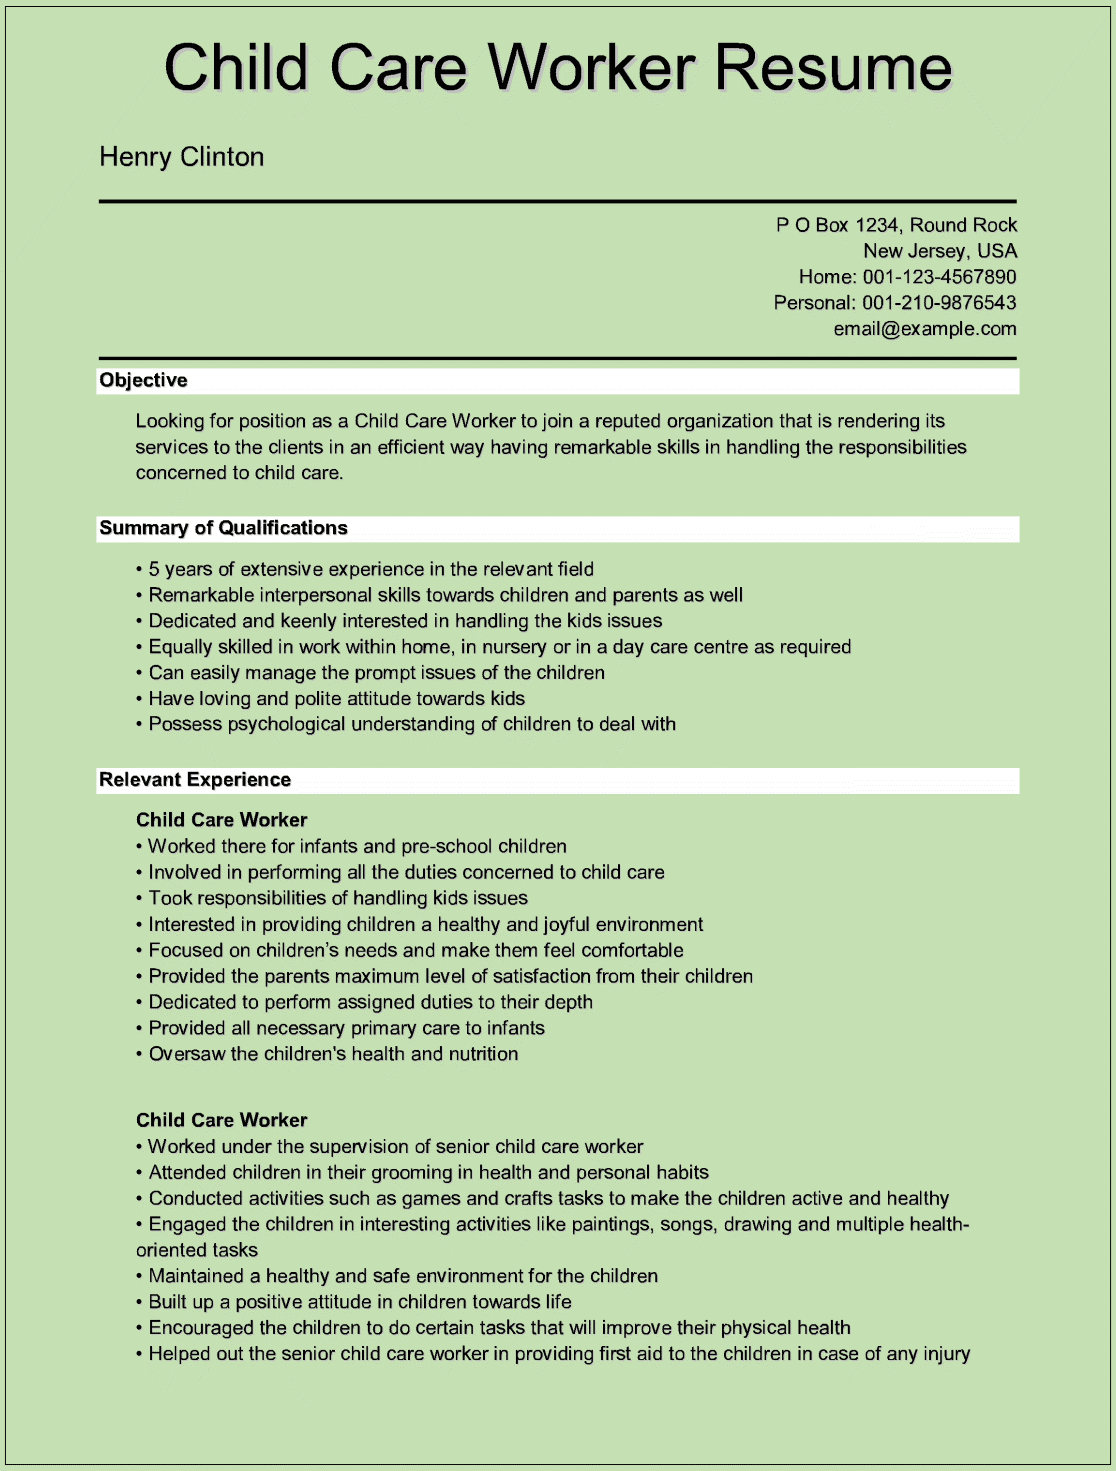 Sample Child Care Worker Resumes For Microsoft Word Doc in dimensions 1116 X 1471